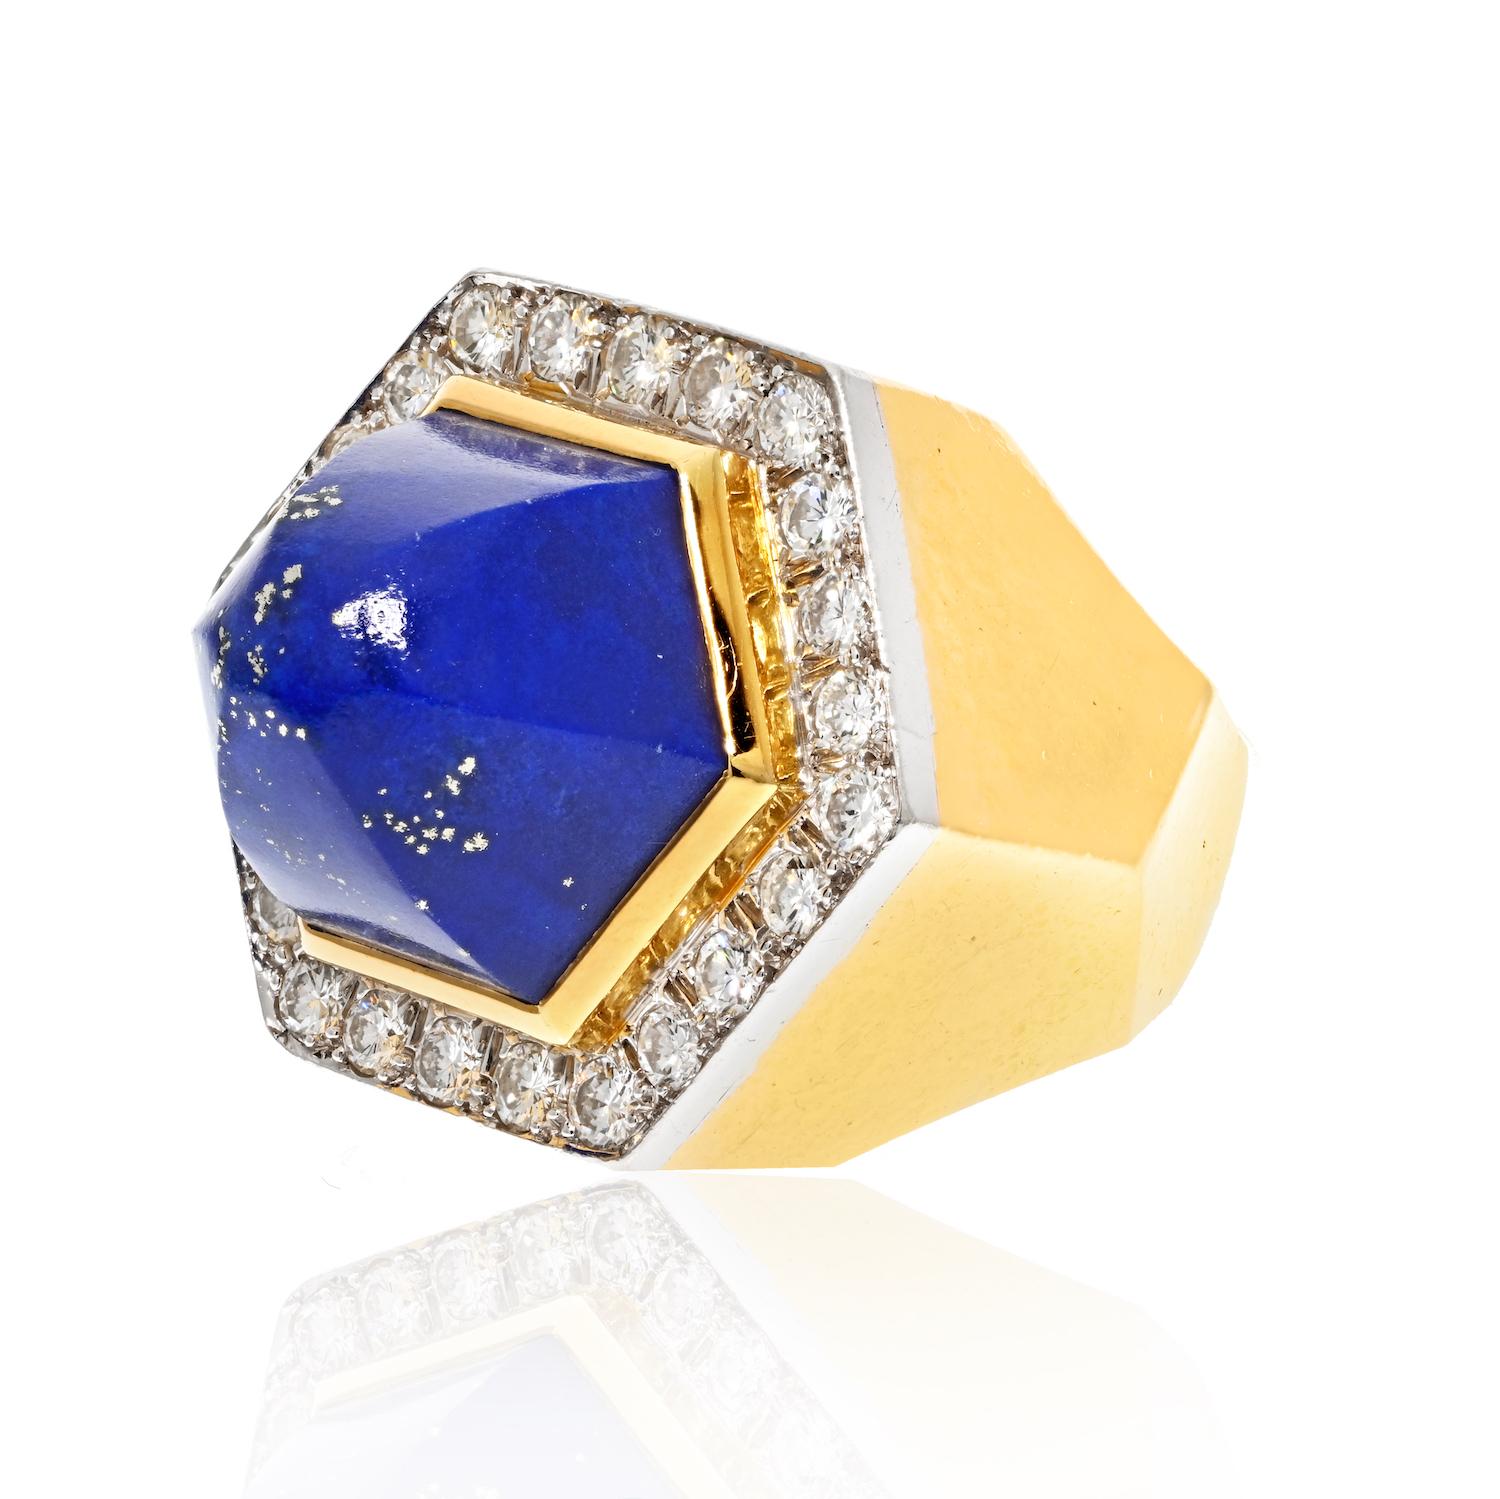 This David Webb platinum and 18K yellow gold oversized lapis and diamond ring is very special. It is crafted with exquisite craftsmanship and attention to detail. The combination of the vibrant lapis and sparkling diamonds is stunning and makes this